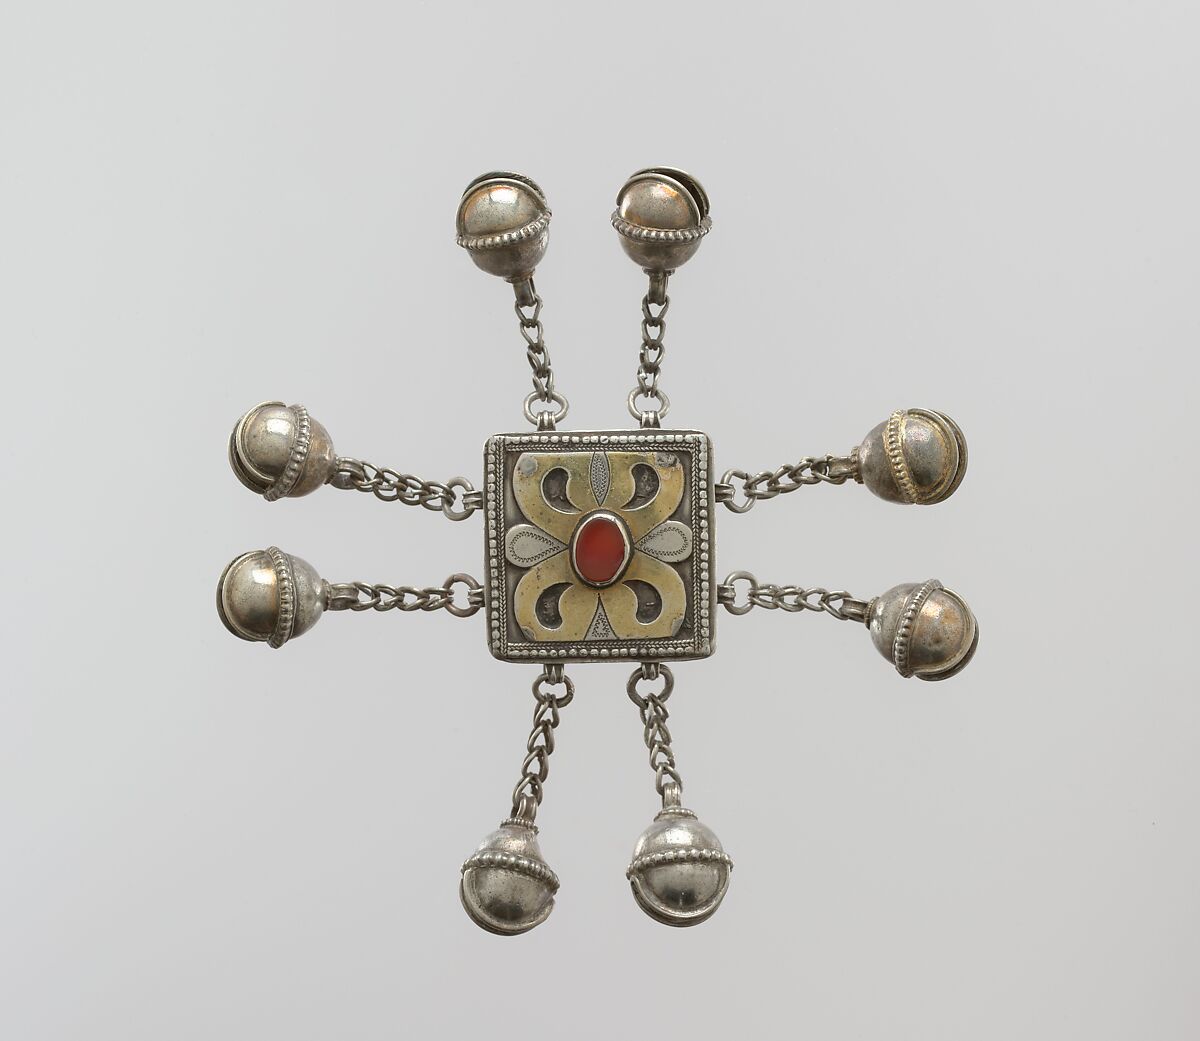 Amulet for Boy's Cap, Silver; fire-gilded and chased, with decorative wire, openwork, loop-in-loop chains, bells, and table-cut carnelian 